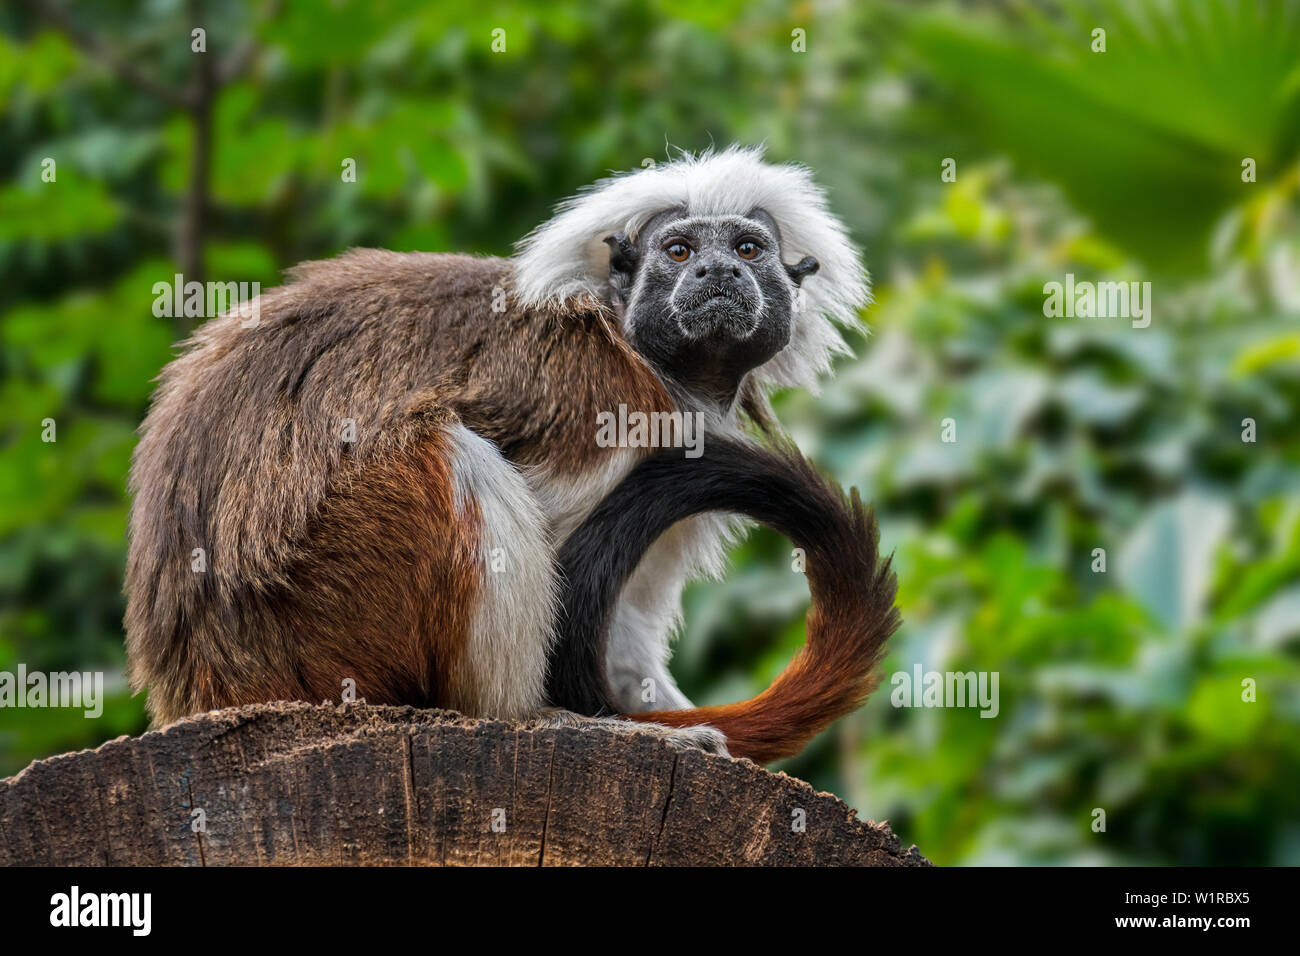 Saguinus High Resolution Stock Photography and Images - Alamy